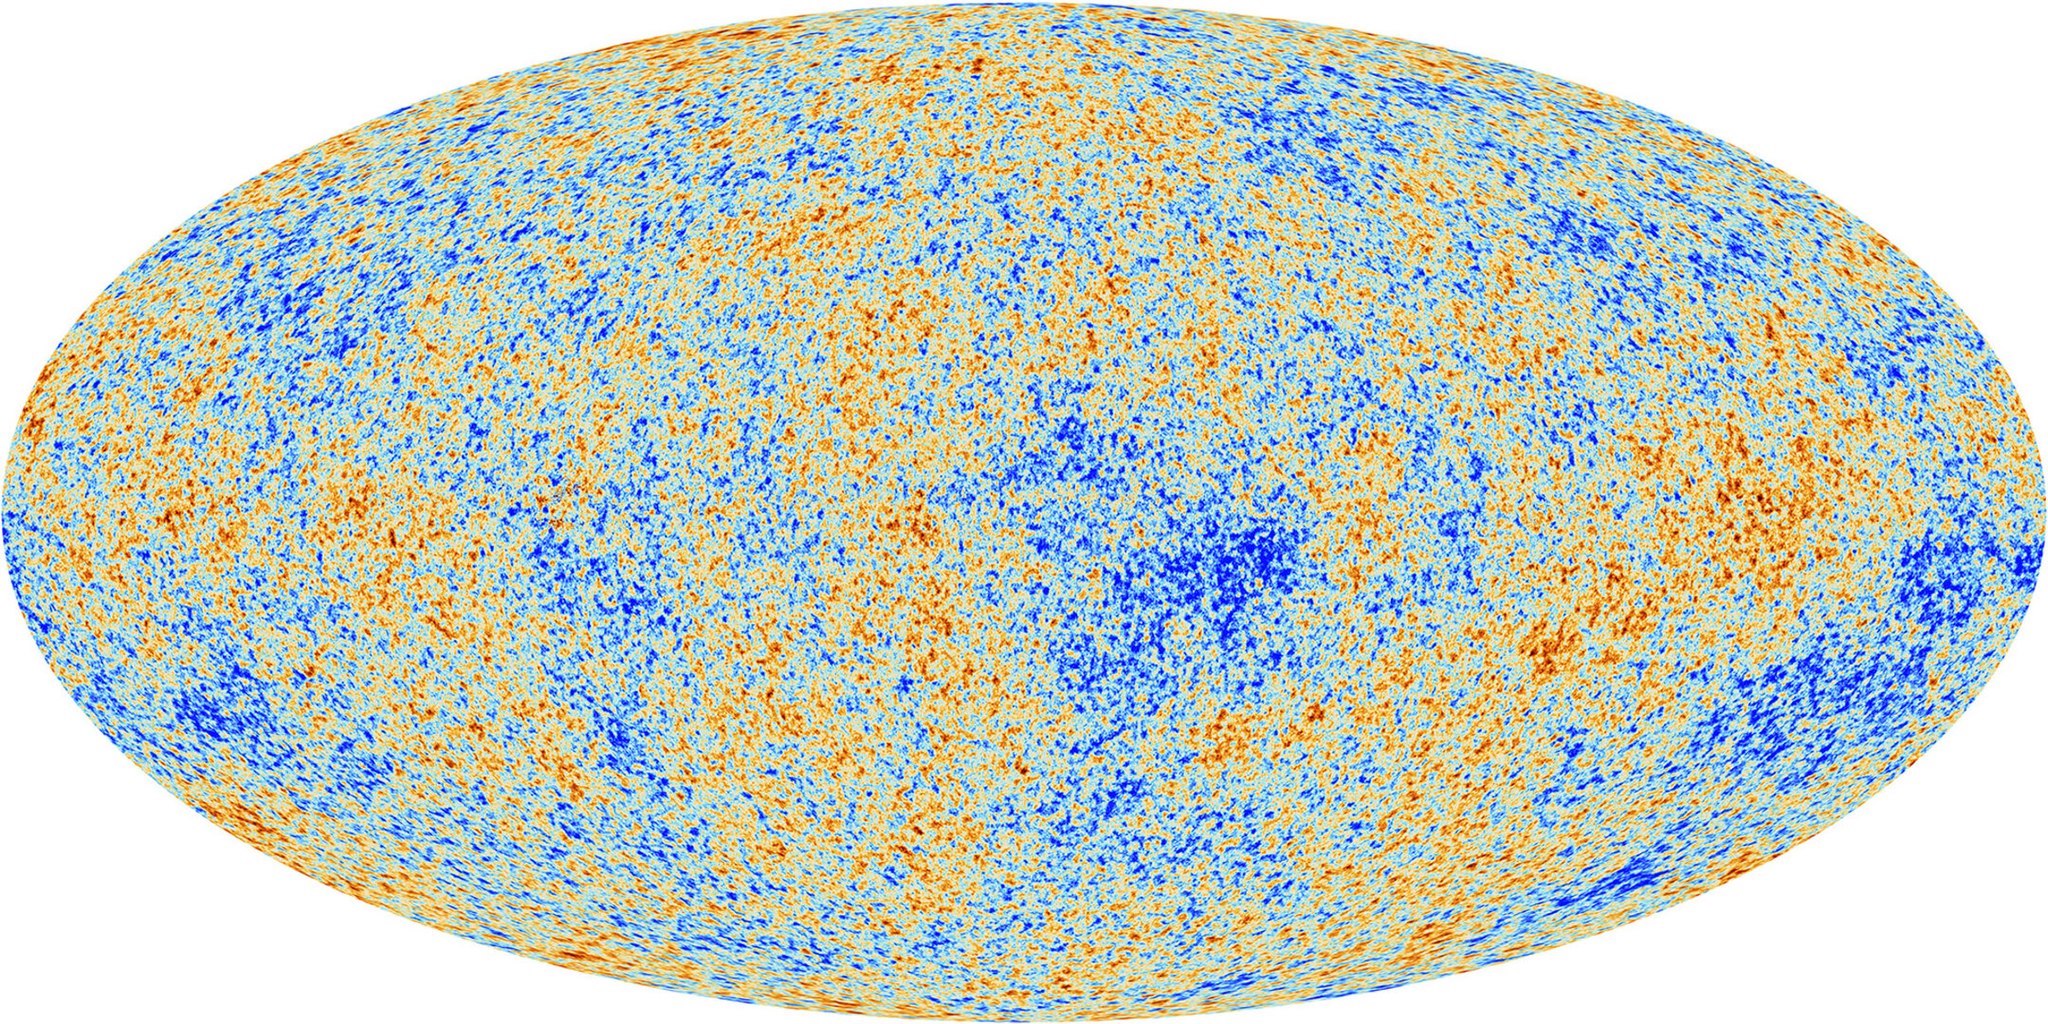 Cosmic Microwave Background as seen from the Planck Satellite (European Space Agency)